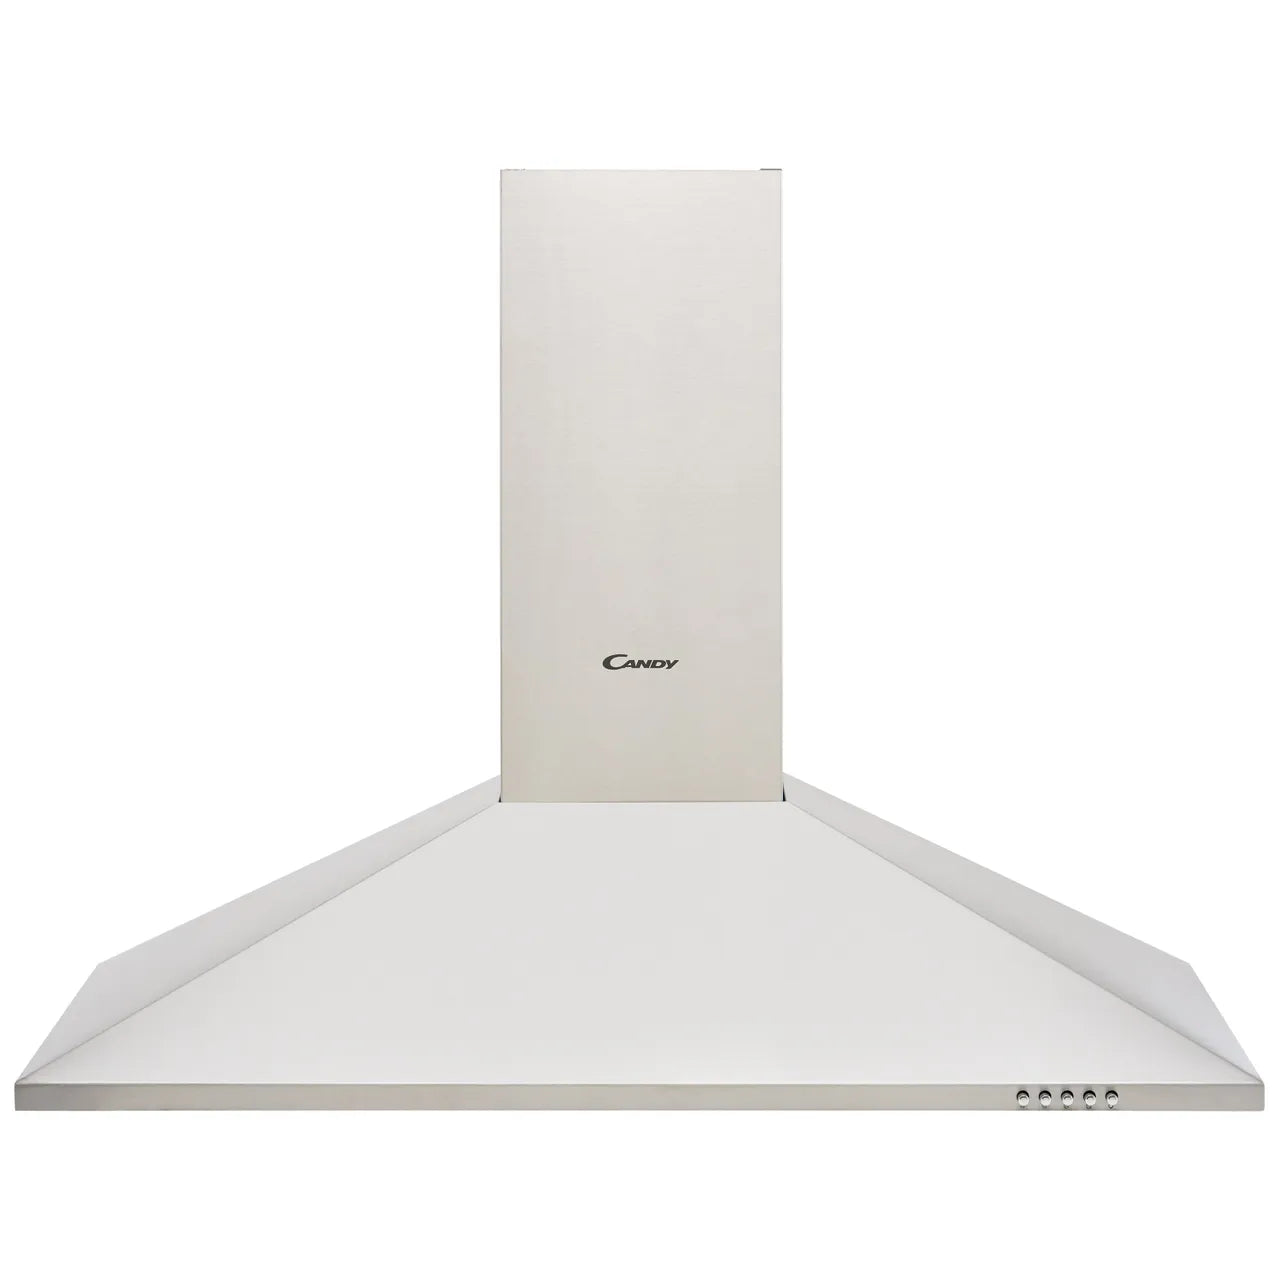 Candy Chimney Cooker Hood Stainless Steel 90cm Silver CCE119/1X 4005